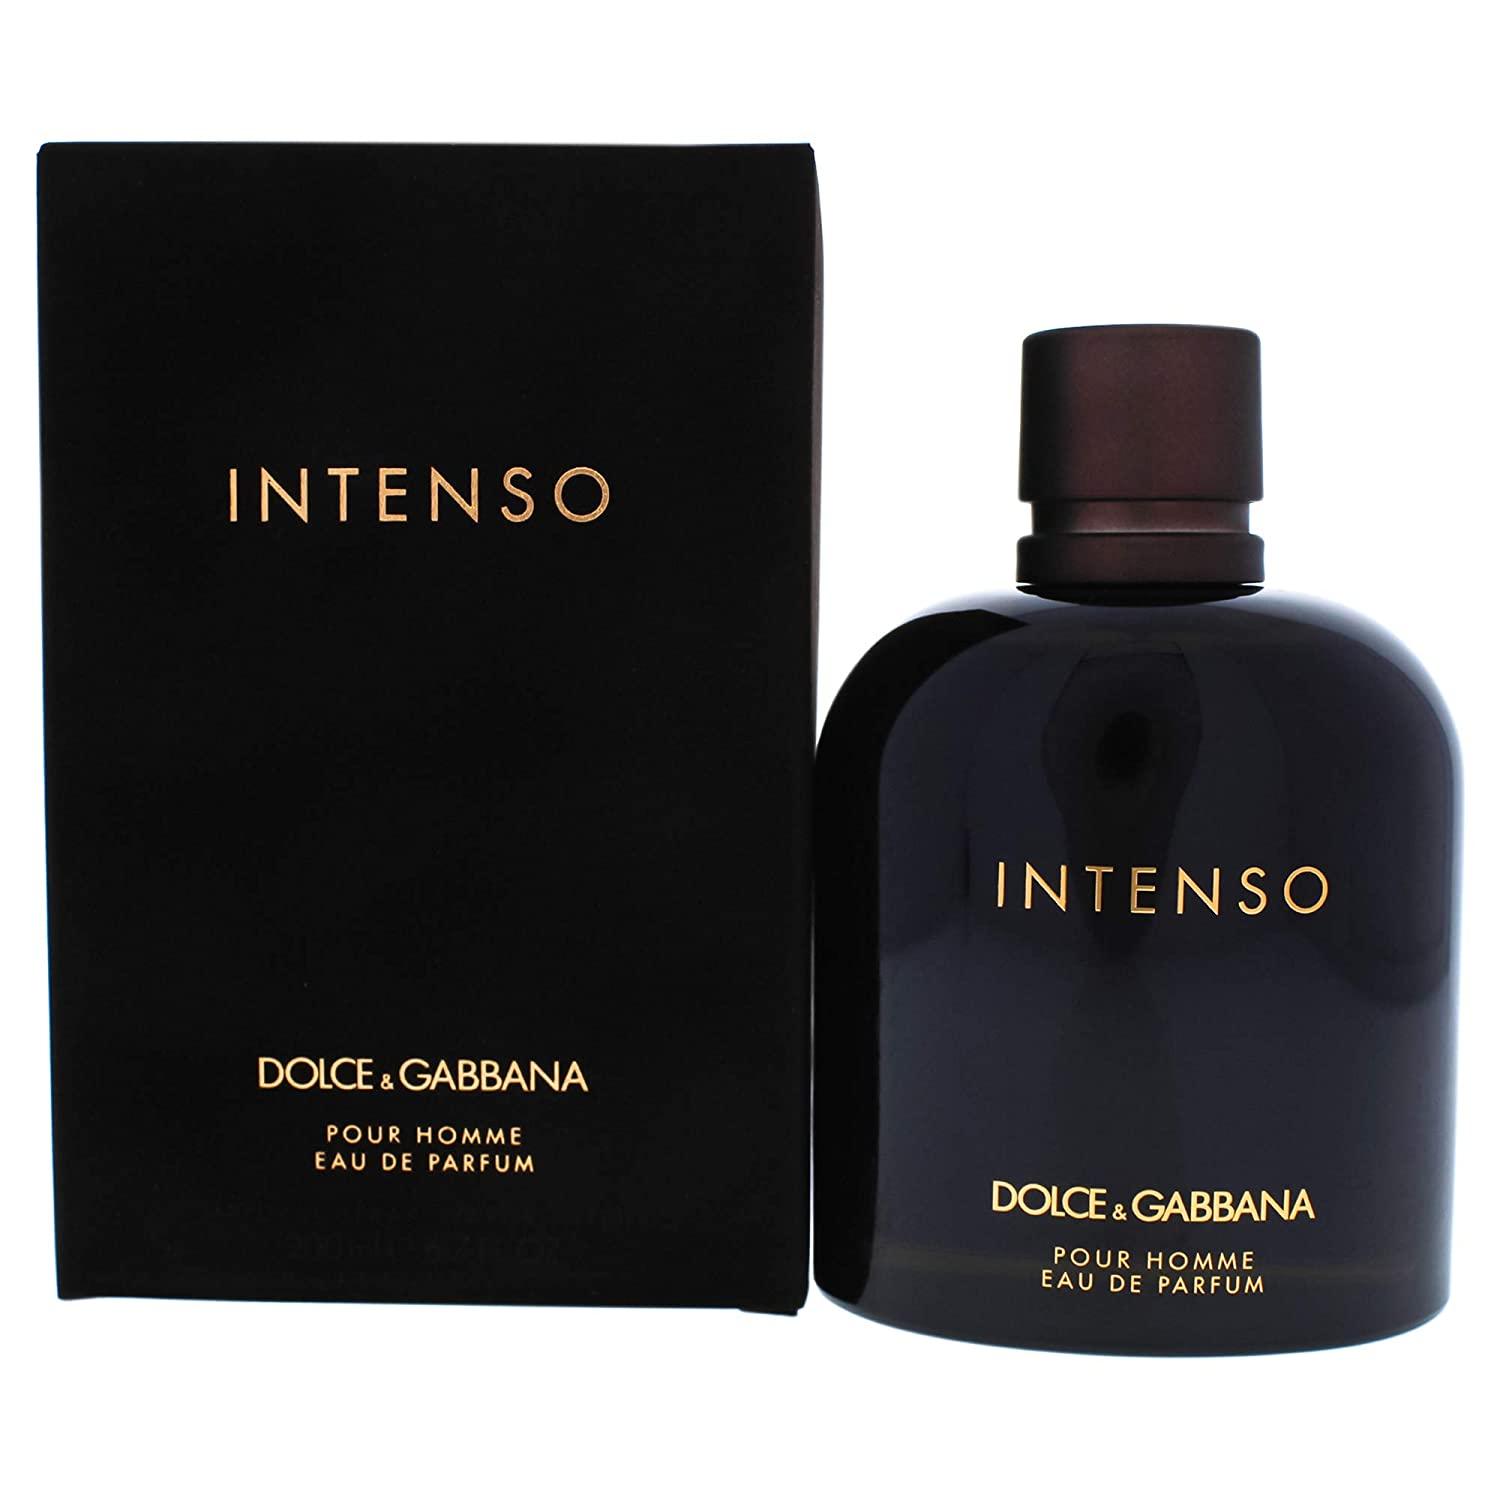  (M) Dolce & Gabana : Intenso Pour Homme - 4.2 Edp